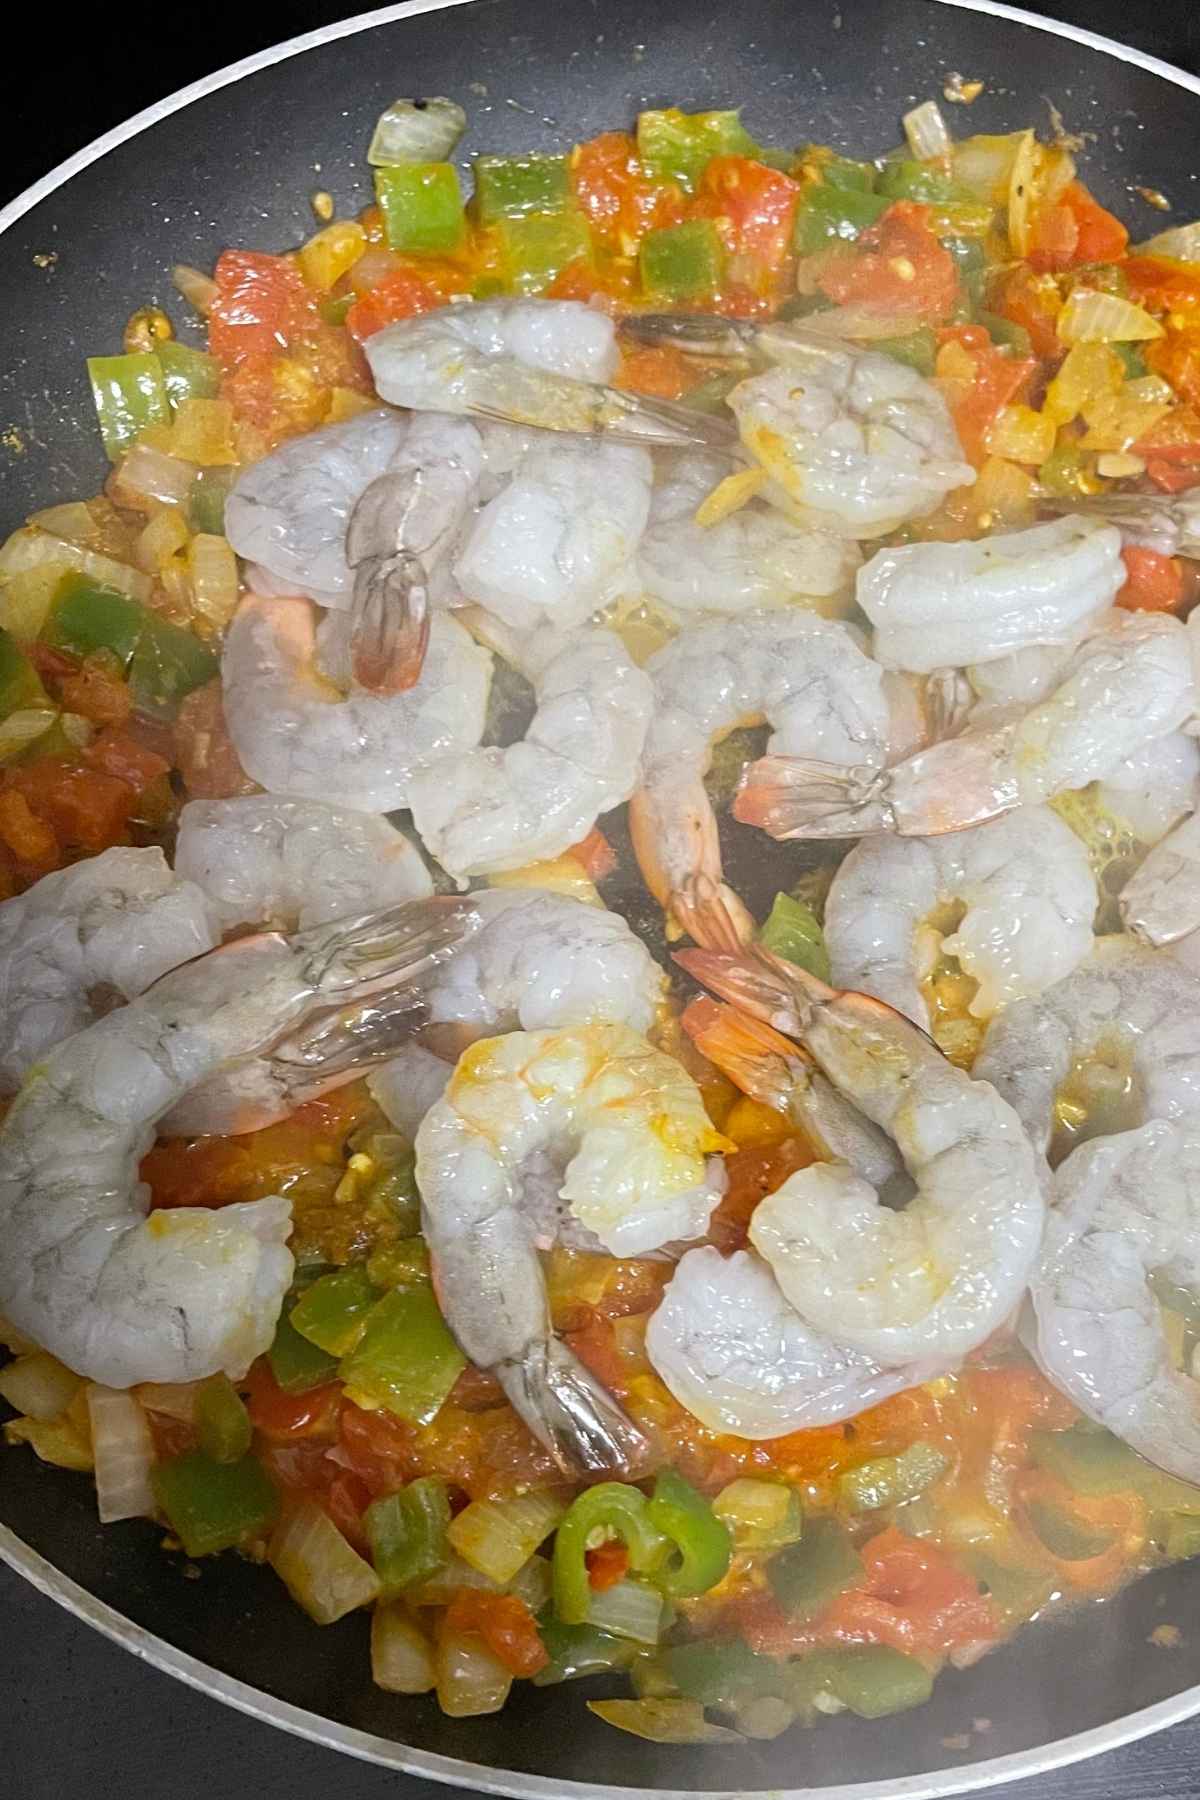 Shrimp cooking in the veggies with curry sauce.